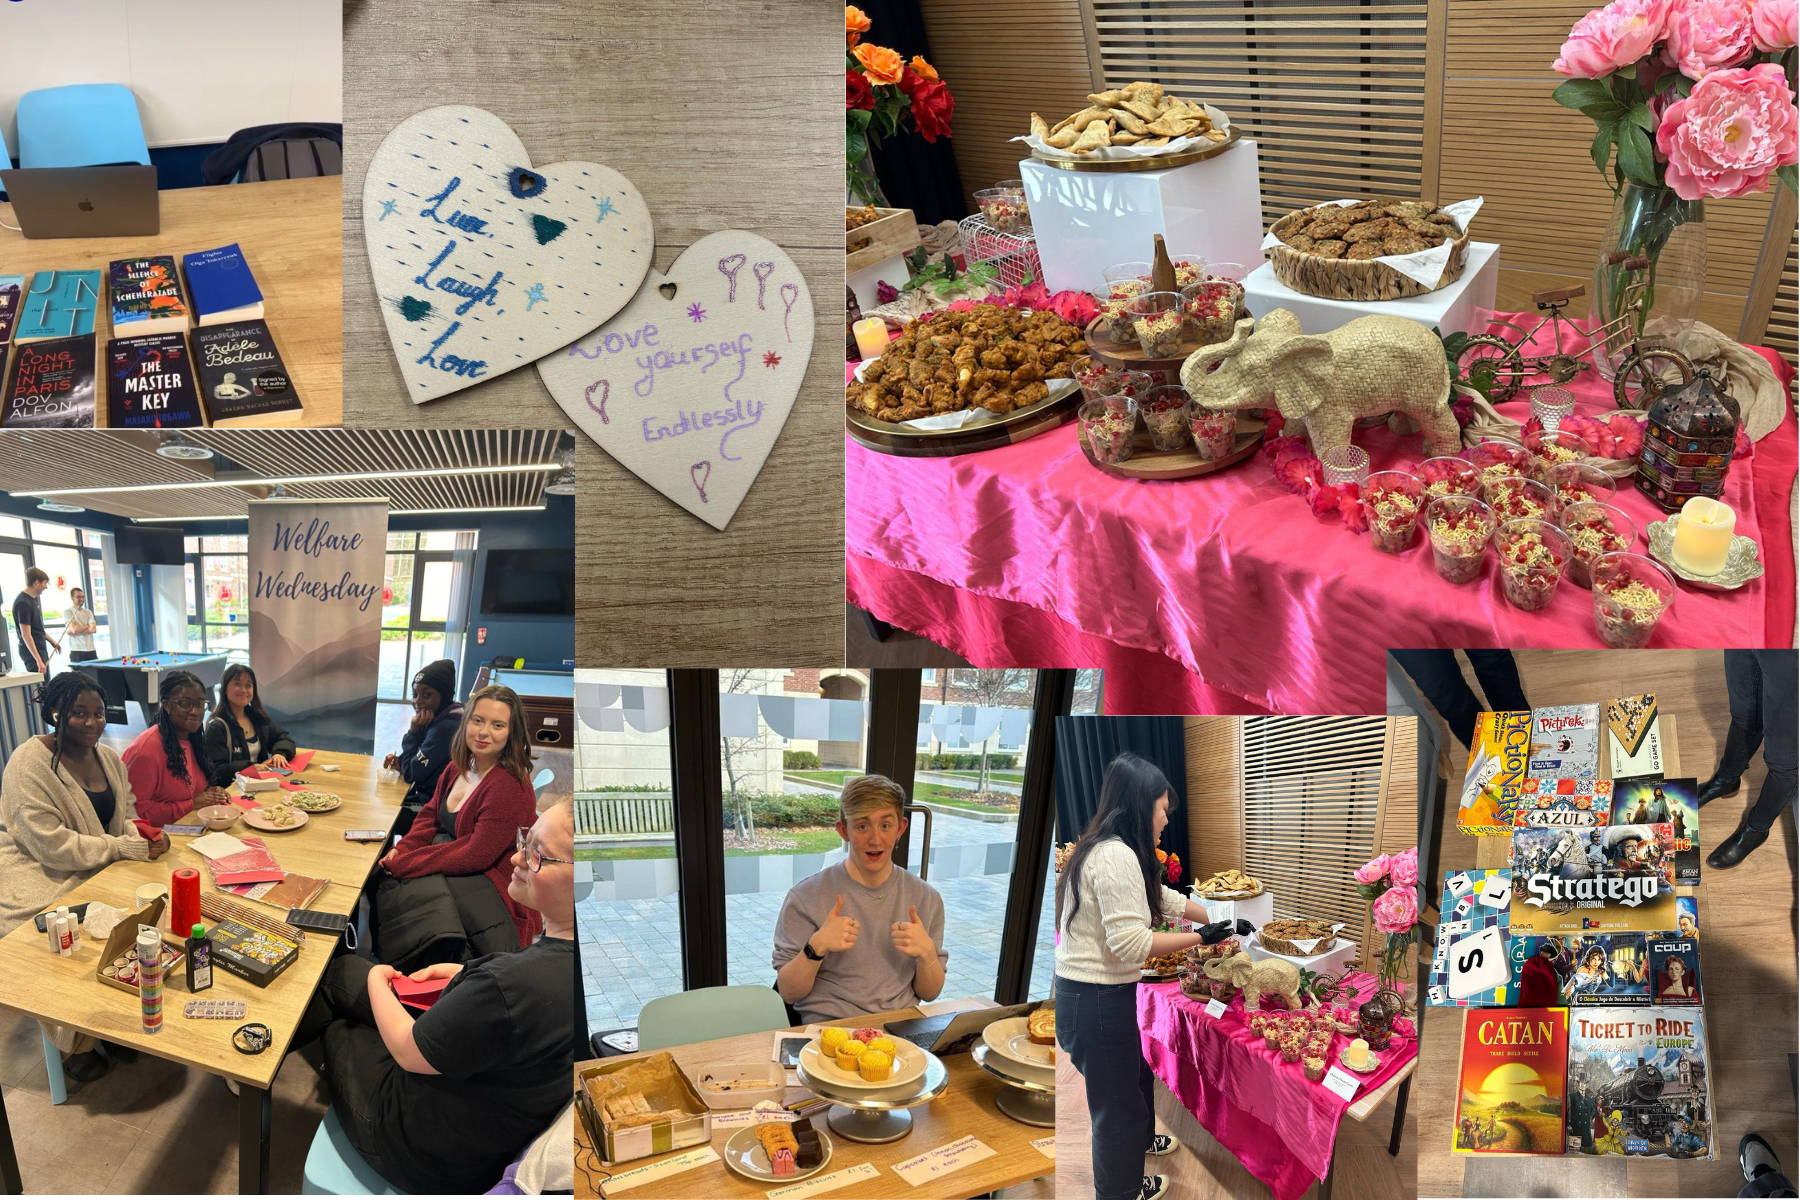 A collage of photos from our Welfare Wednesday events.